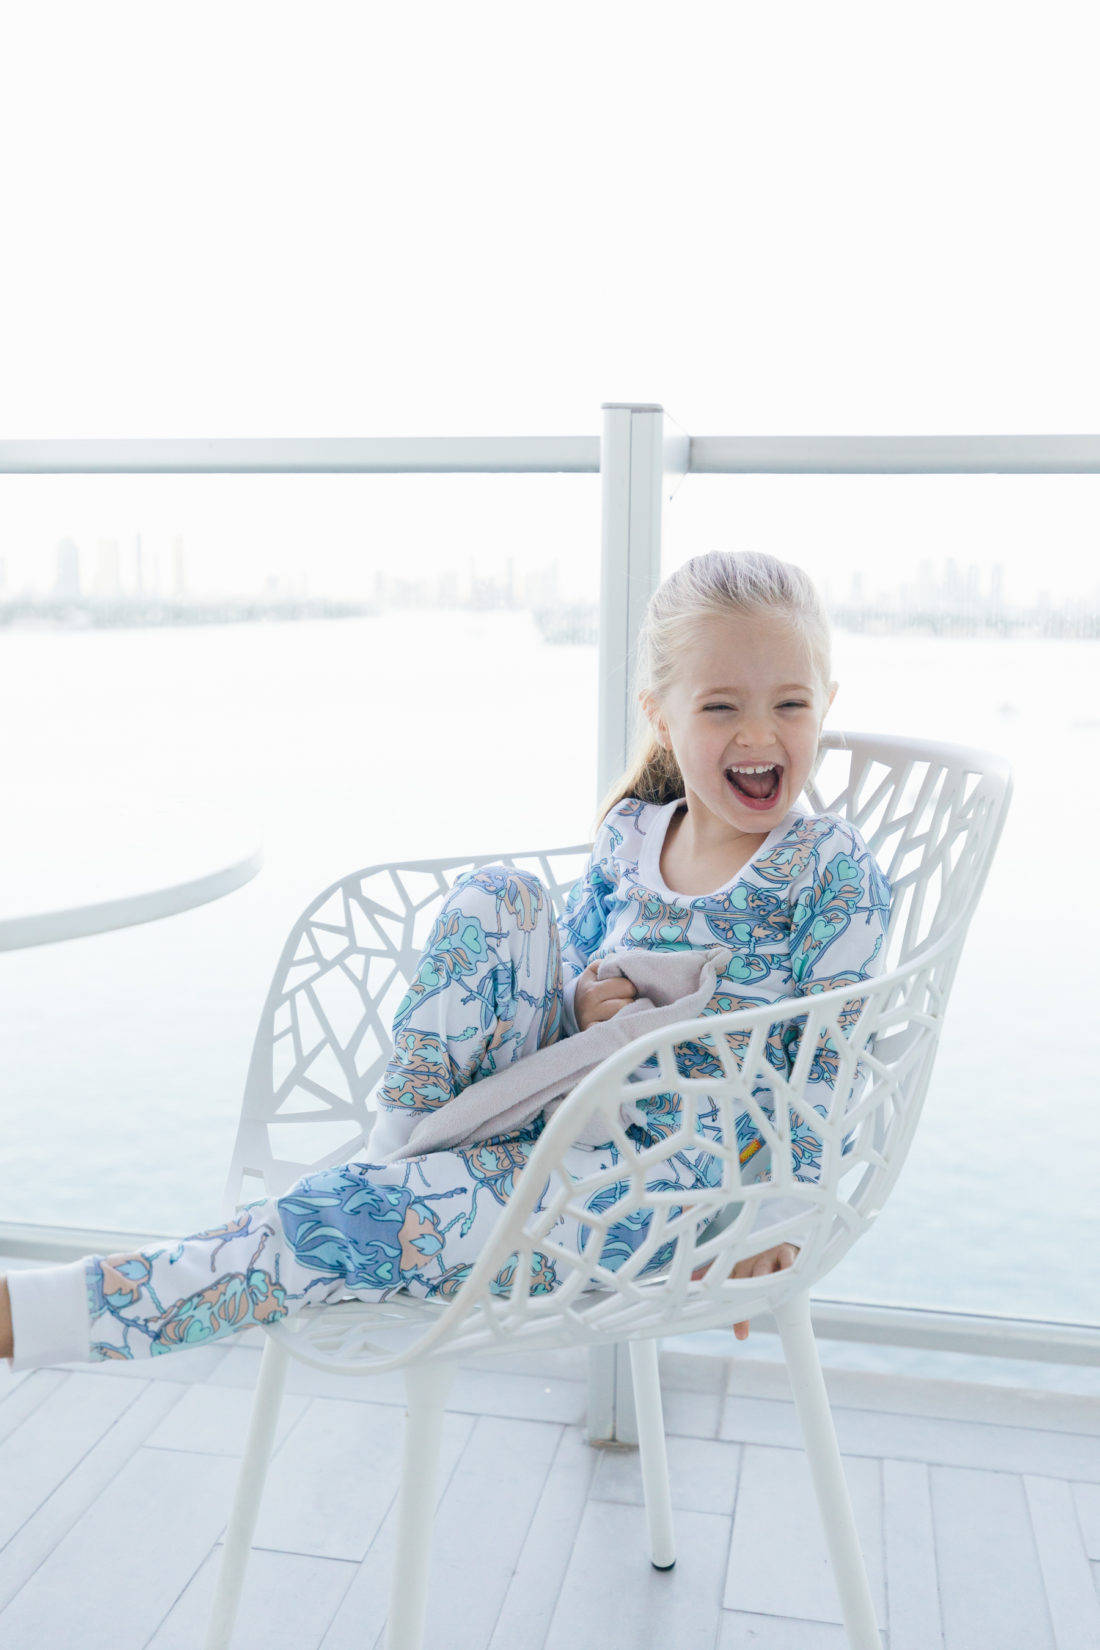 Marlowe Martino relaxes on the balcony in Miami wearing her buggy pajamas from the Happily Eva After x Masala Baby capsule collection